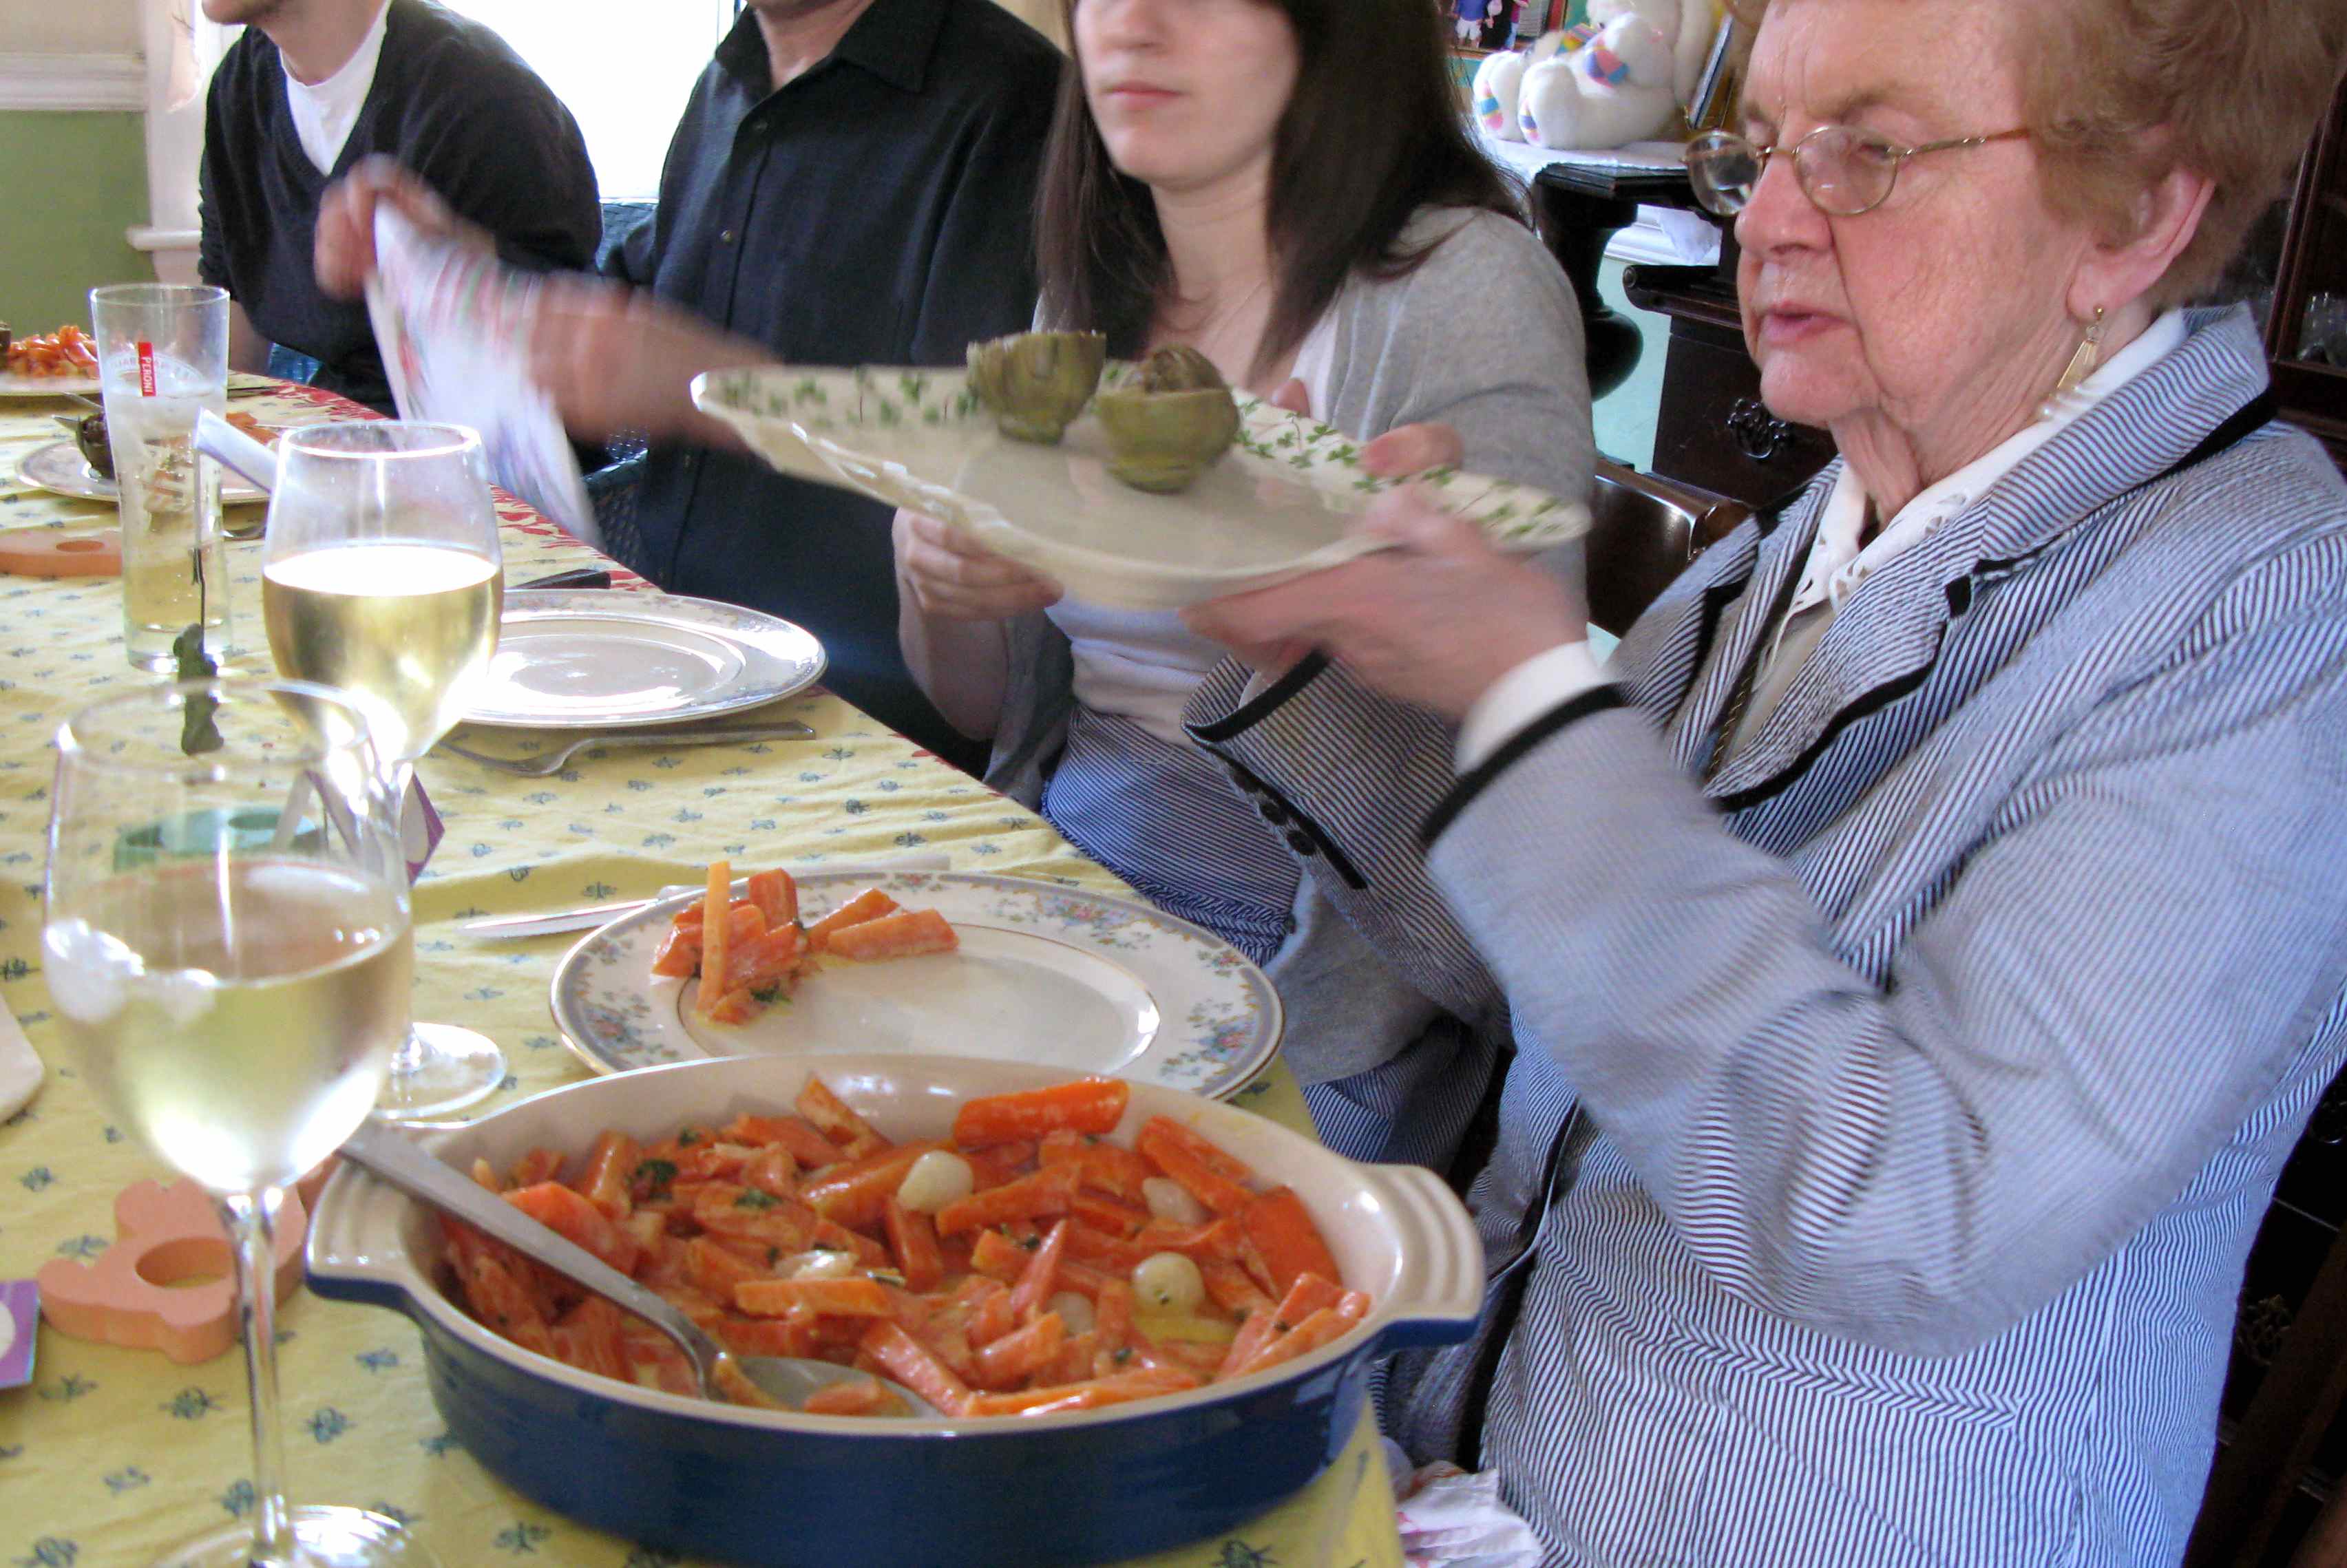 A woman passes a plate at a dinner table